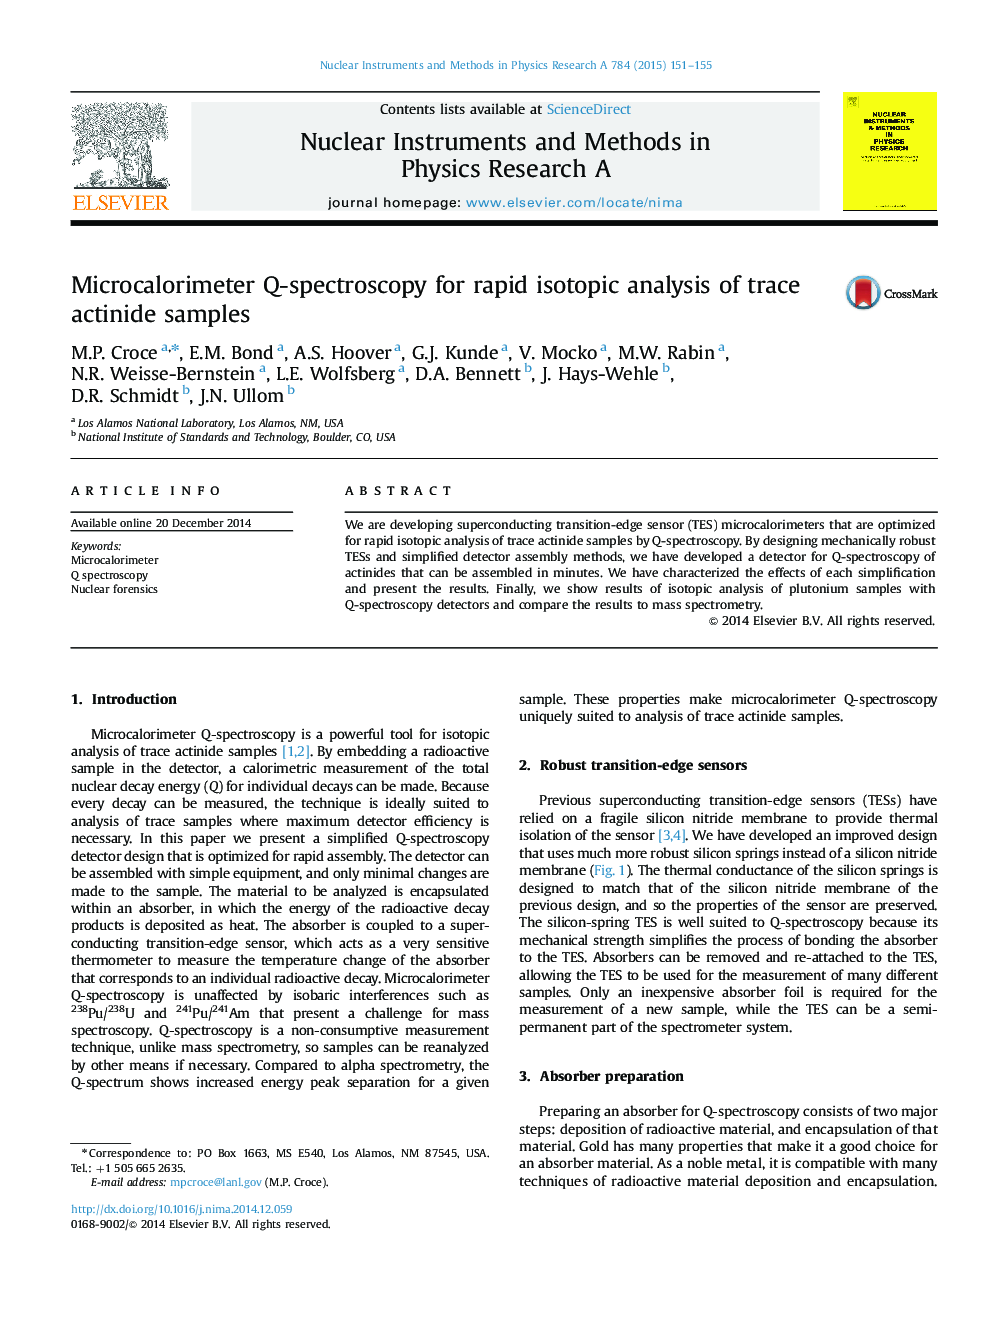 Microcalorimeter Q-spectroscopy for rapid isotopic analysis of trace actinide samples